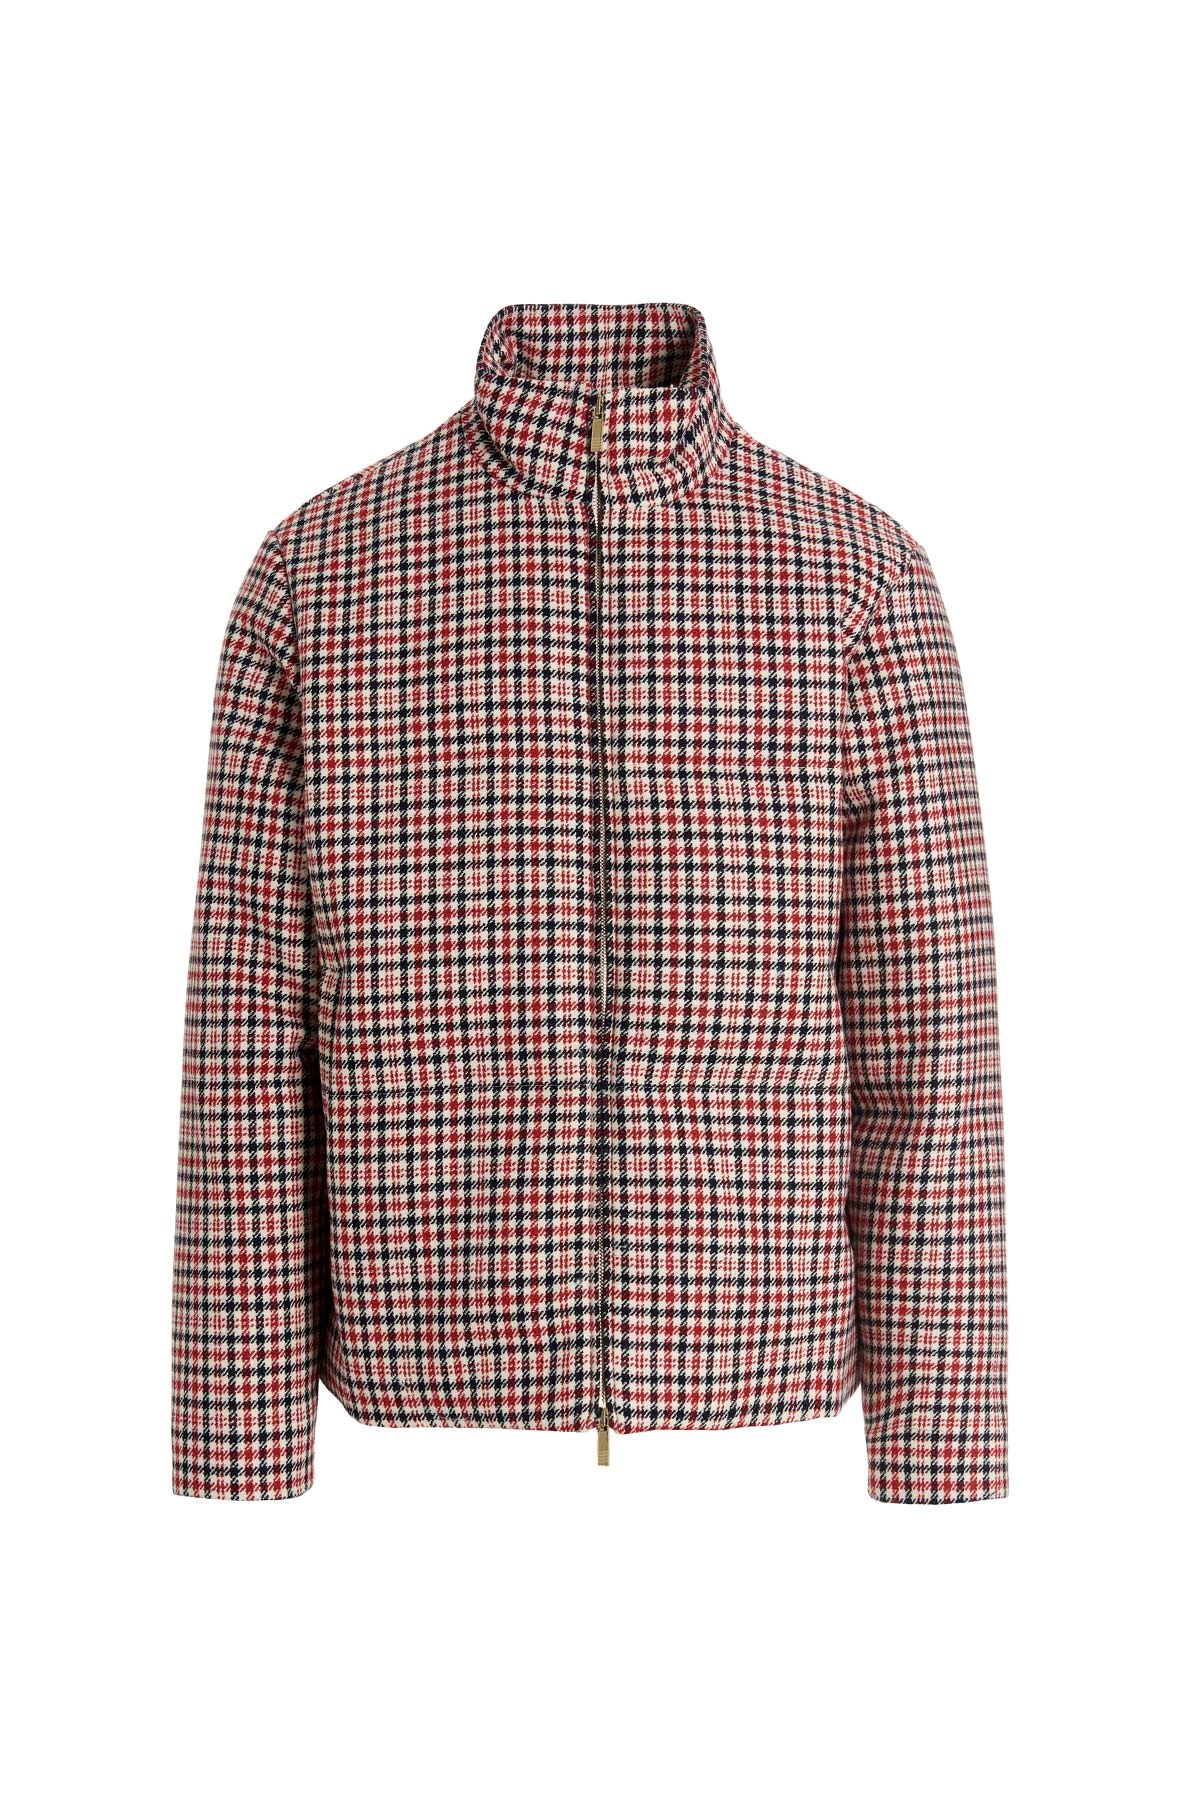 THOM BROWNE All-Over Check Down Jacket